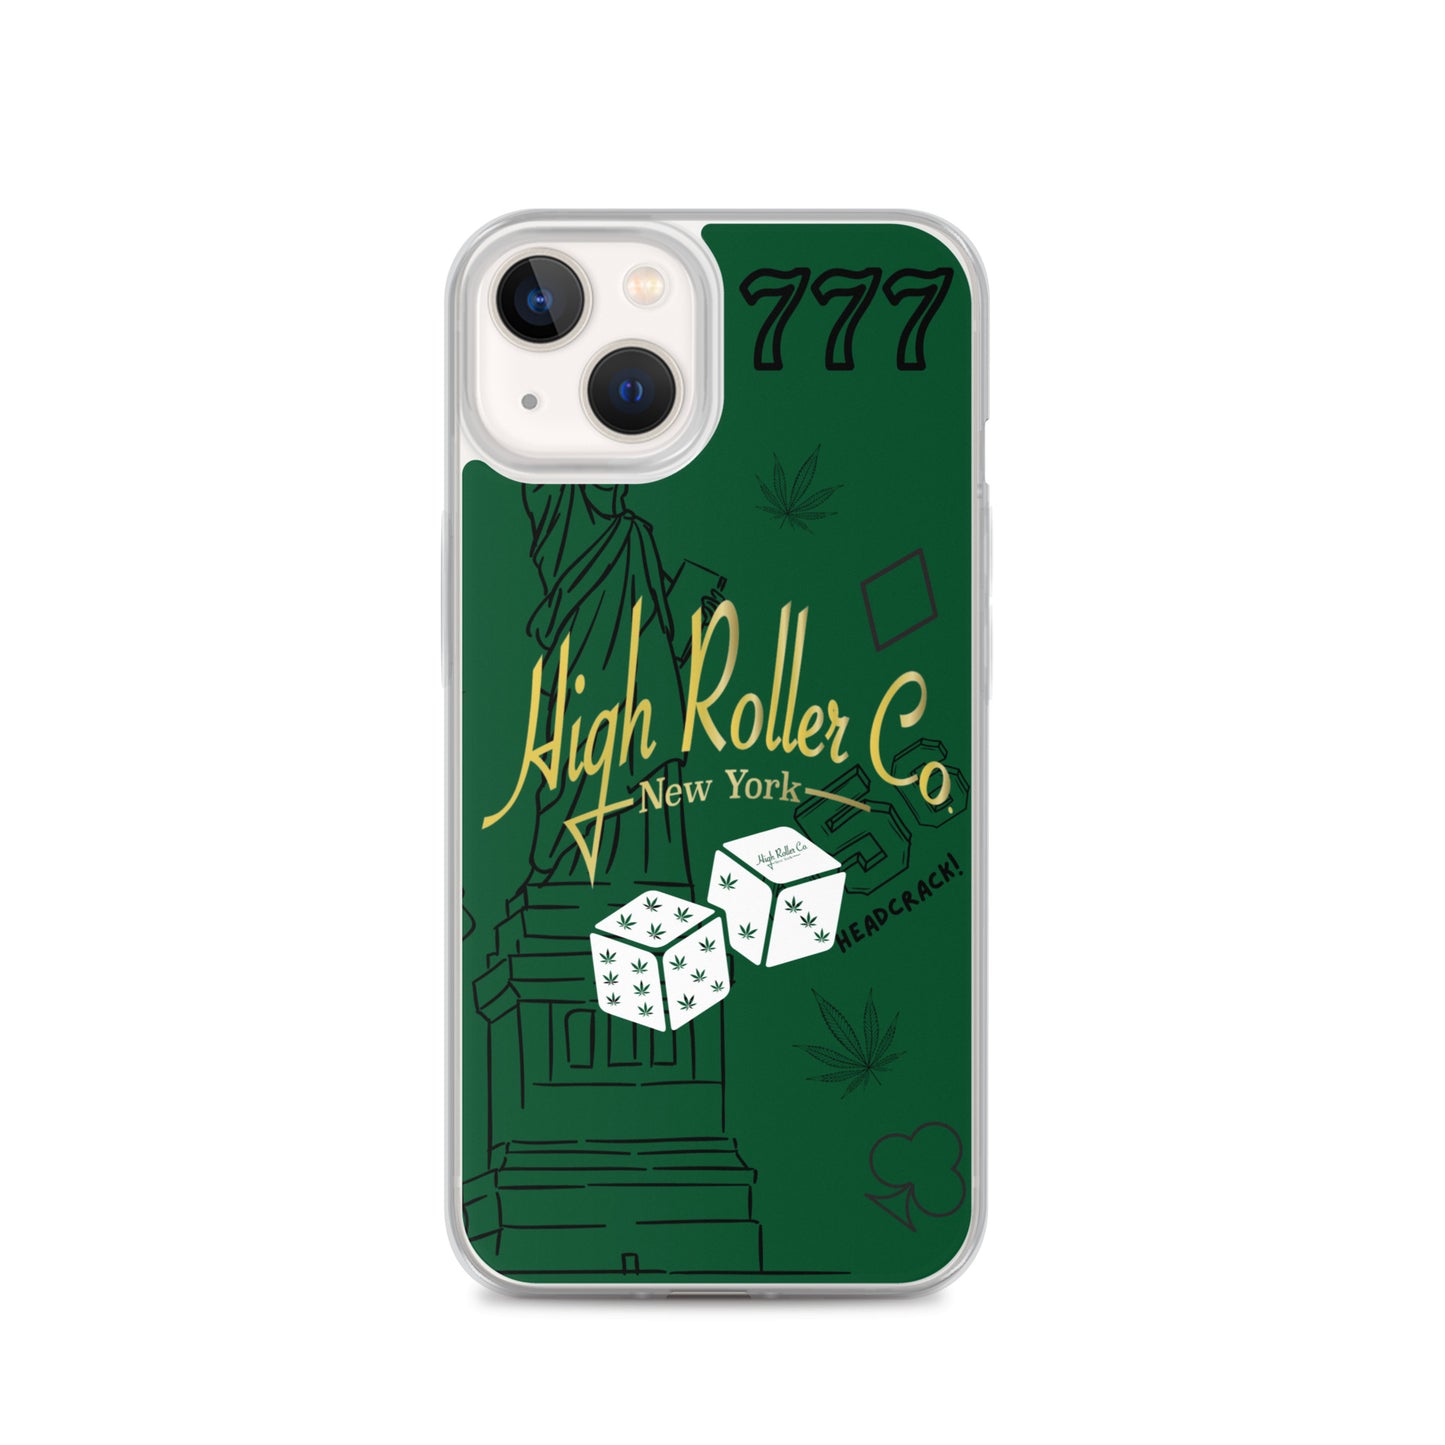 High Roller Co. iPhone Case